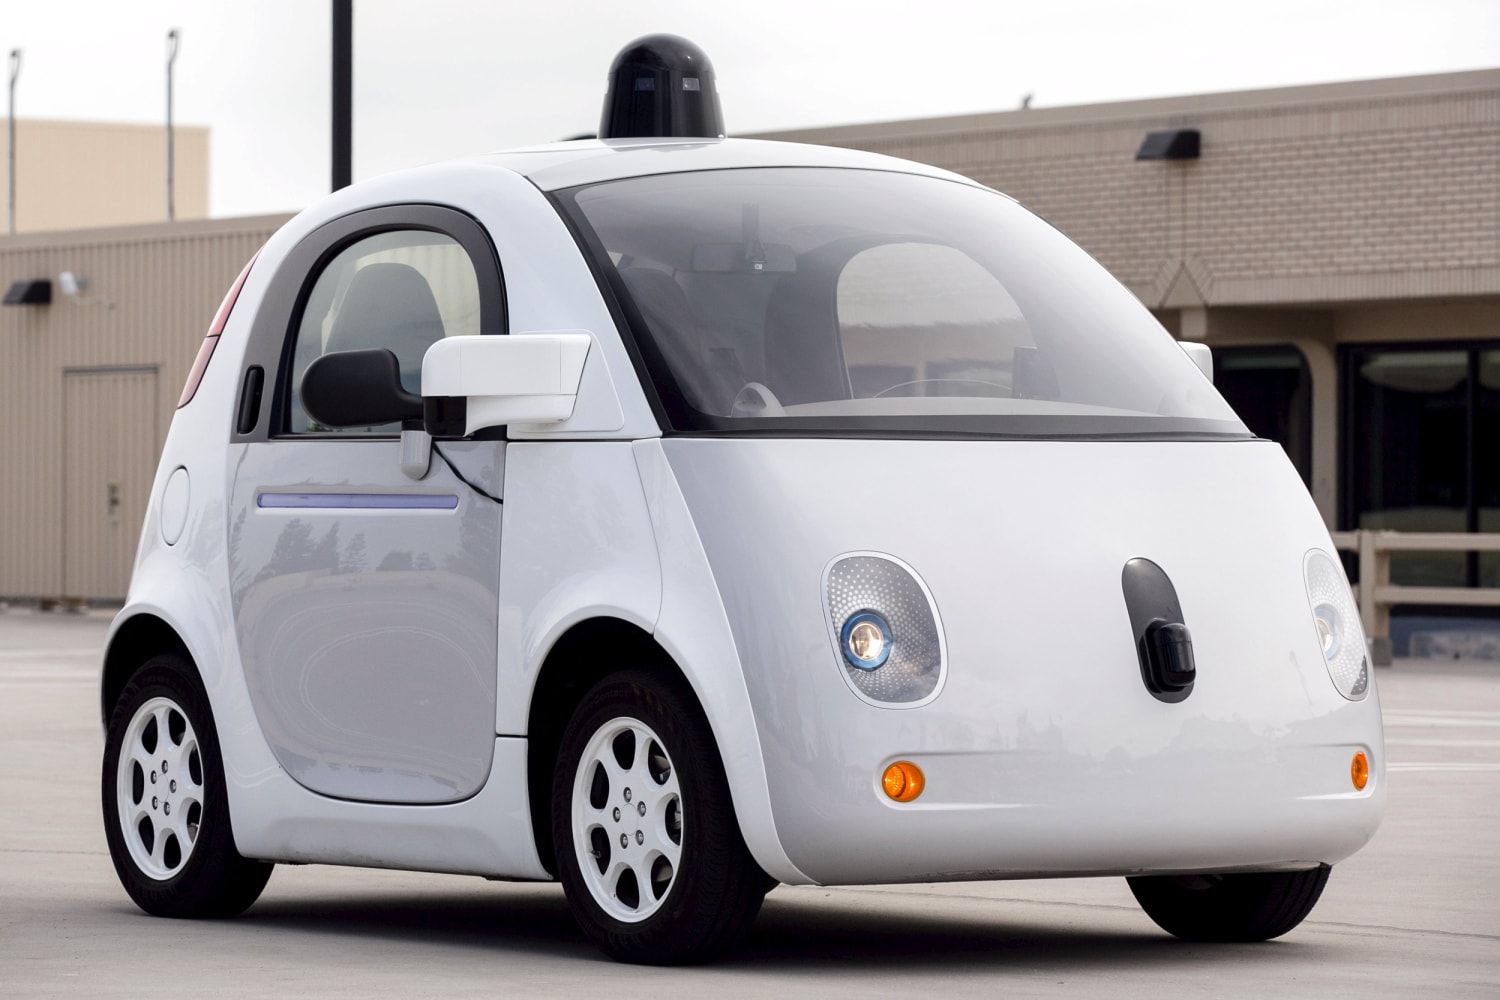 Self-Driving Google Car Gets Pulled Over